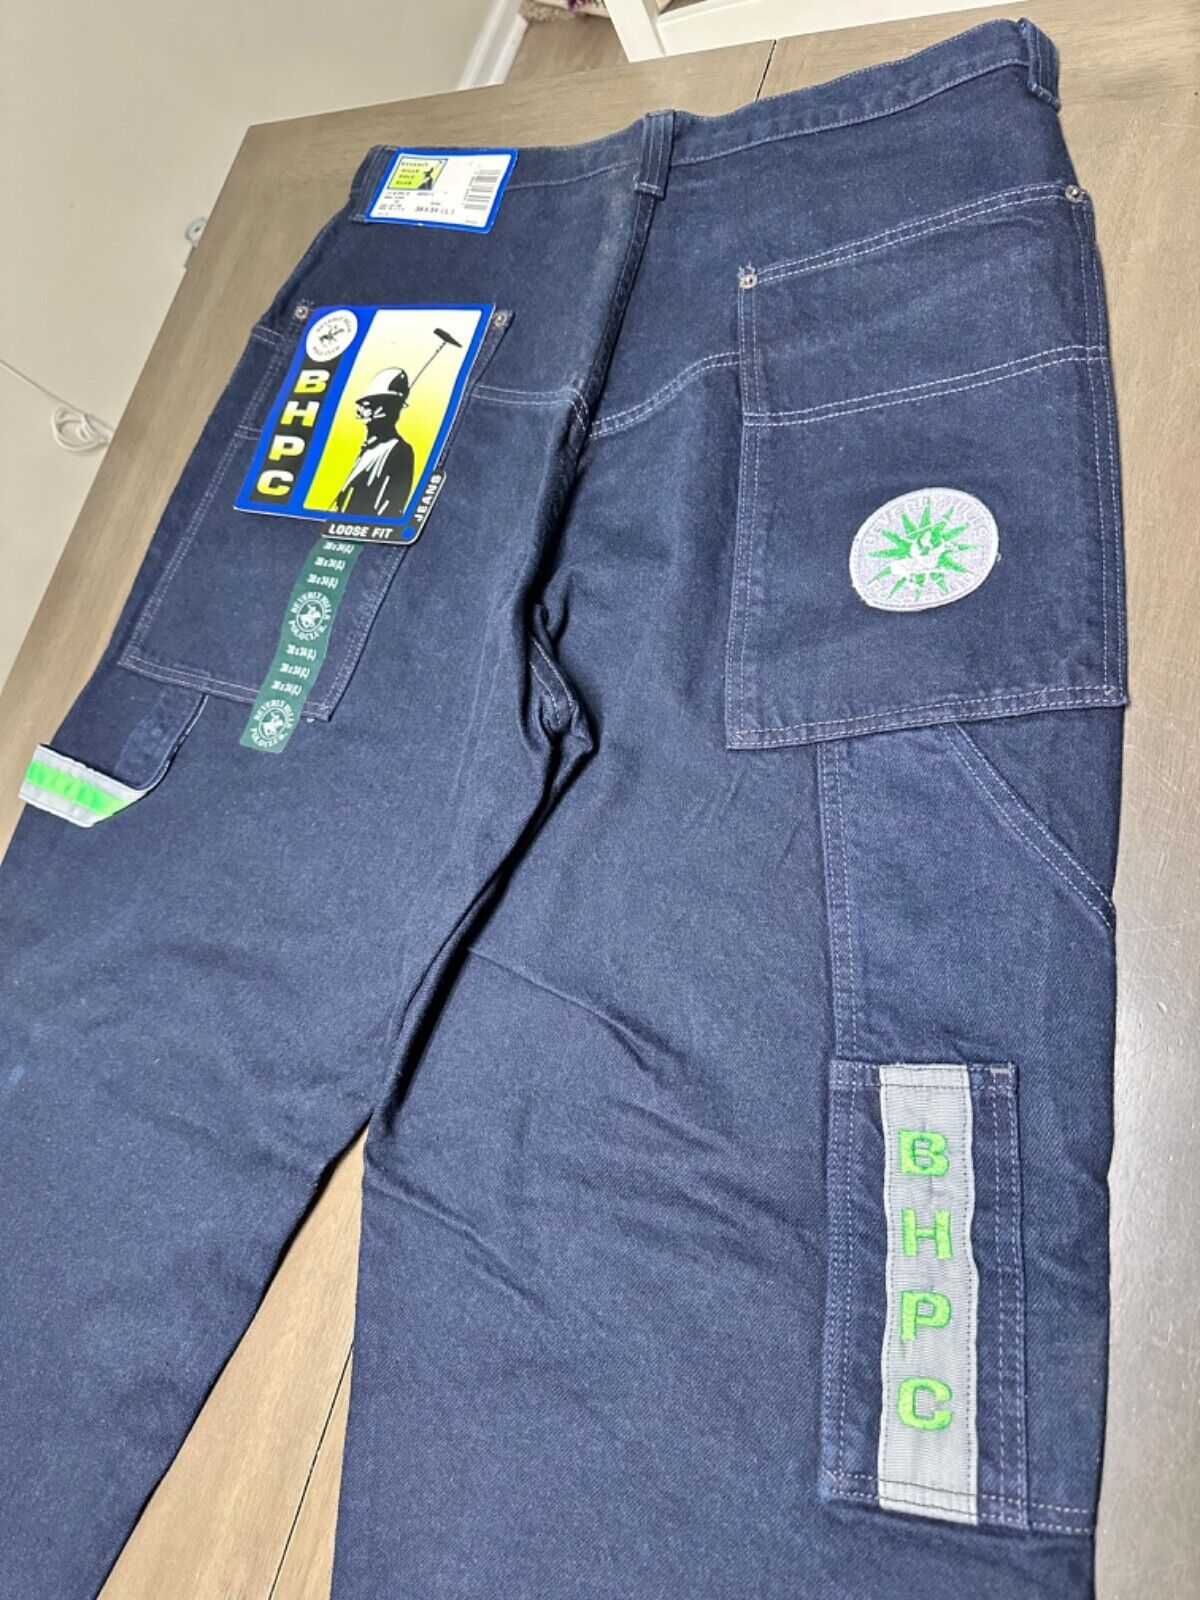 NWT Vintage Beverly Hills Polo Club Carpenter Jeans Men's Size Y2K Embroidered - $115.00